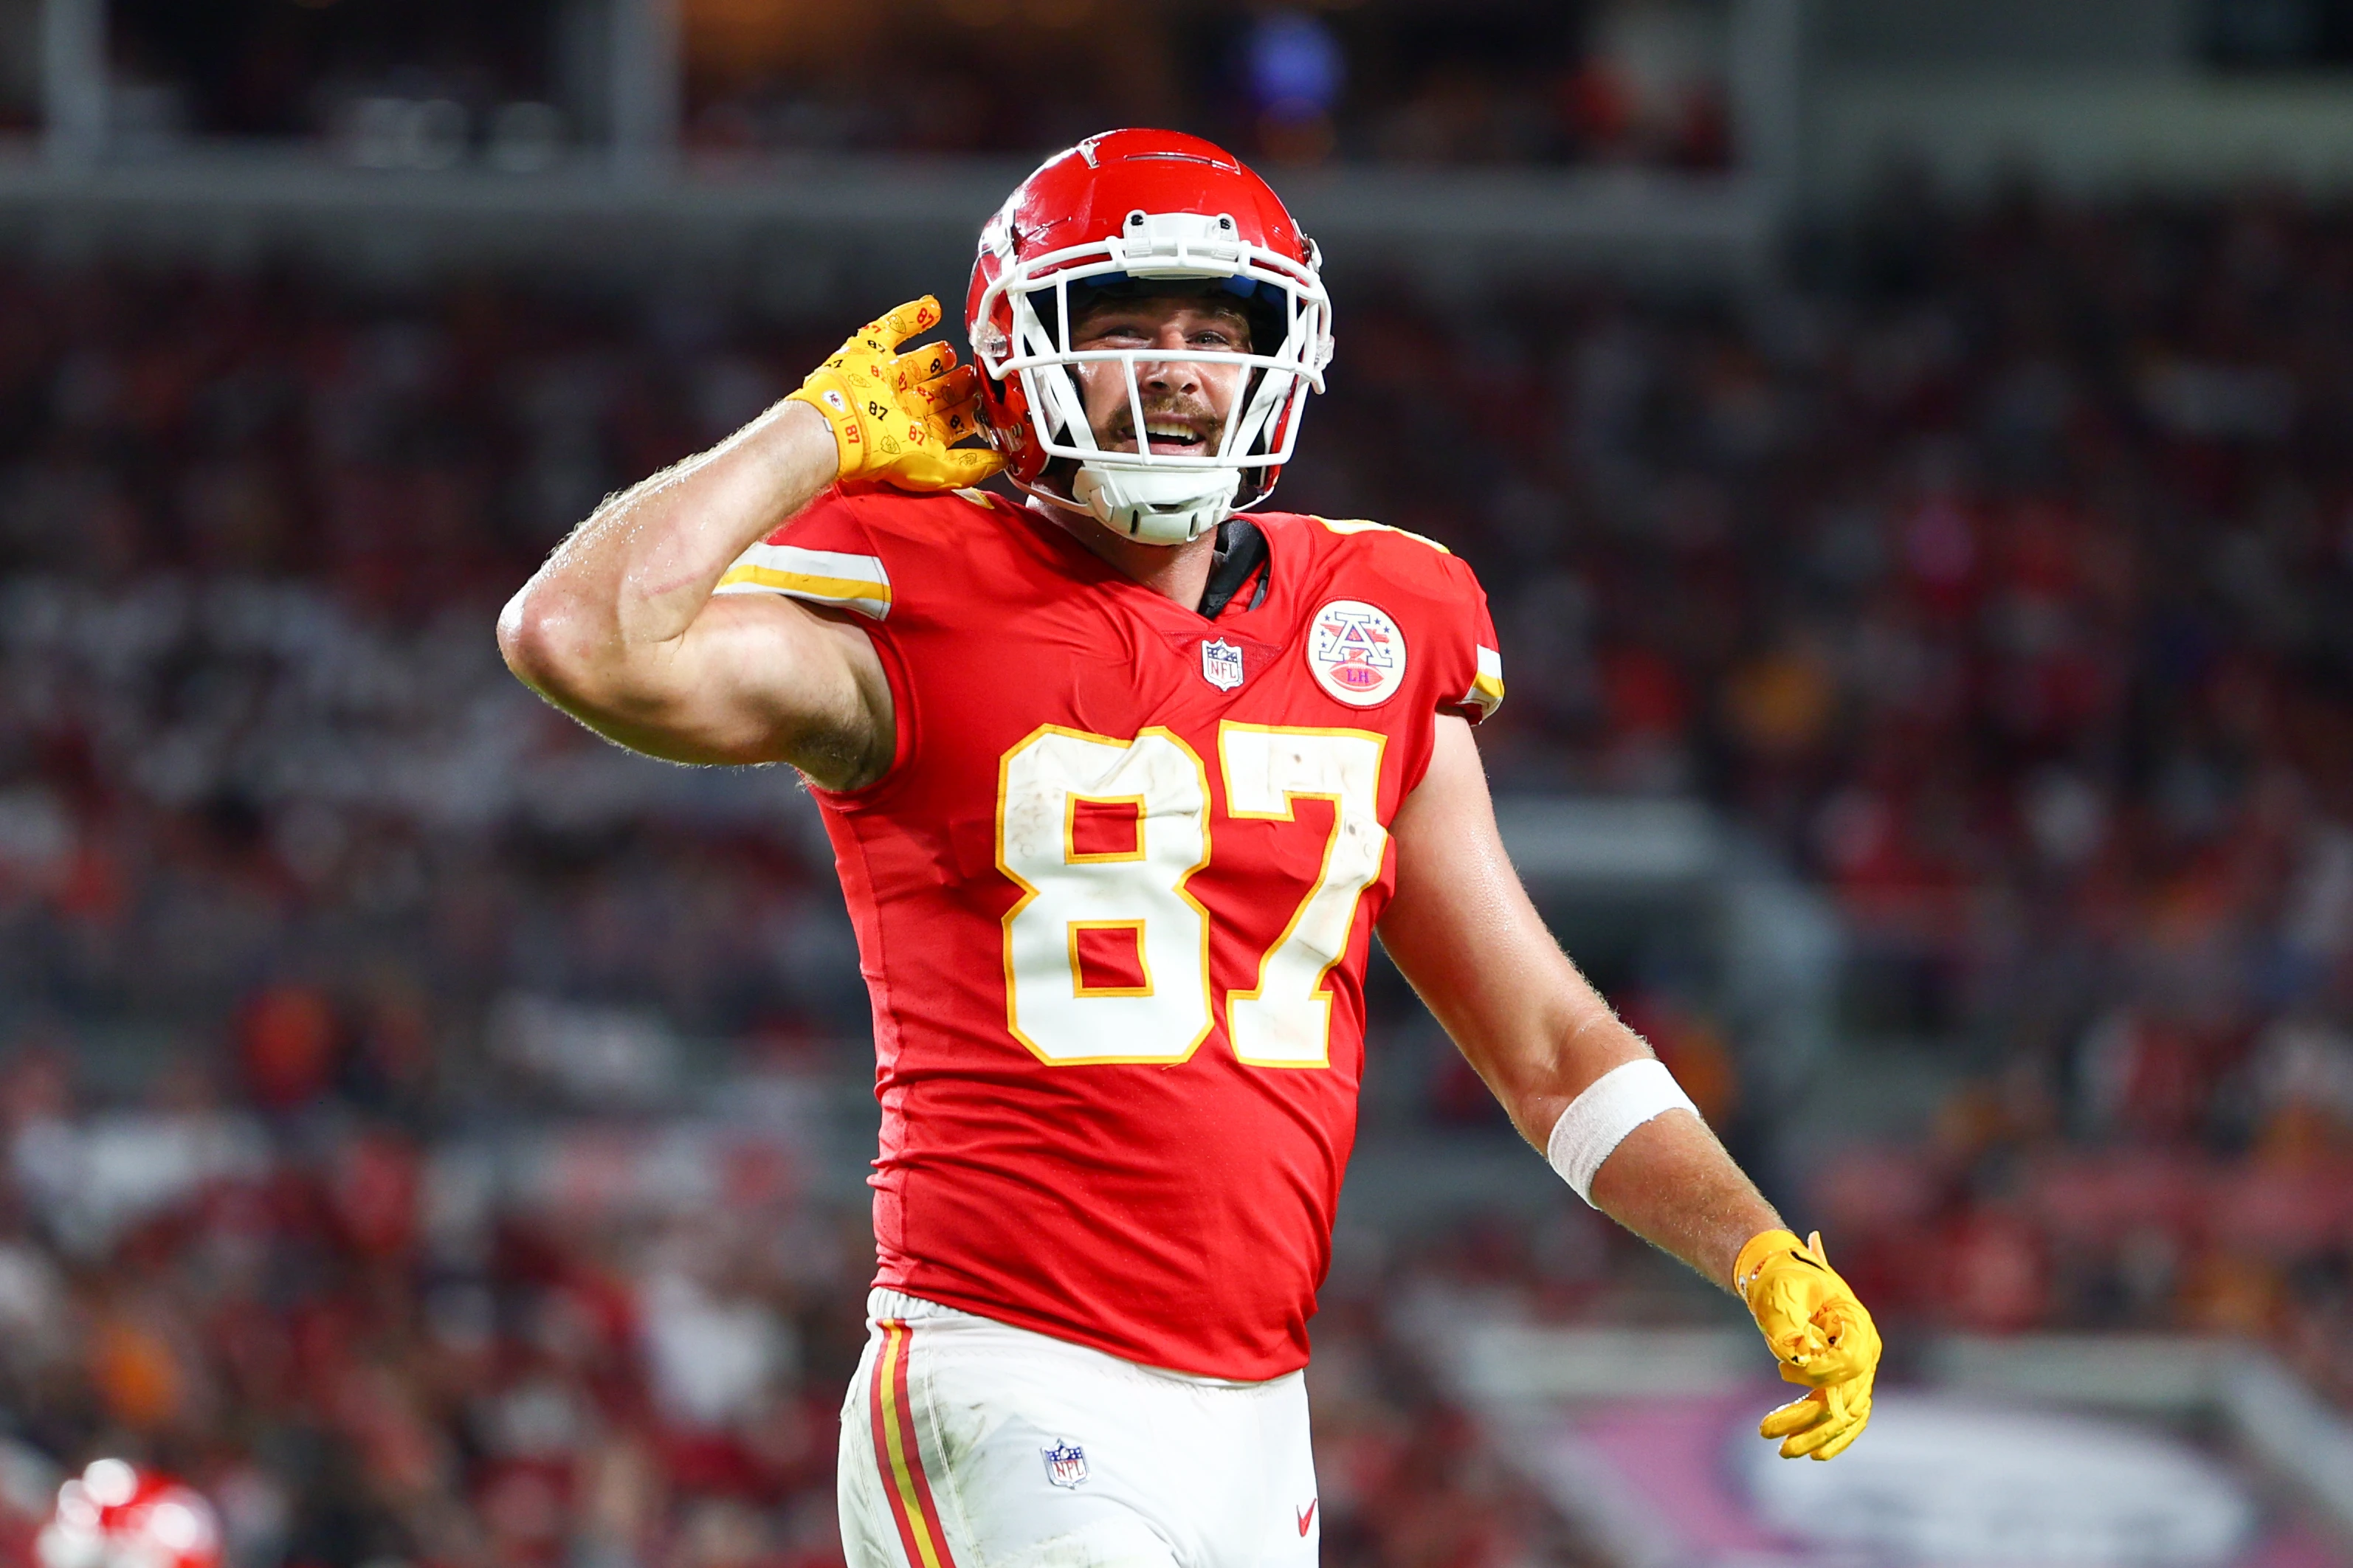 Kansas City Chiefs tight end Travis Kelce (87) reacts after a play against the Tampa Bay Buccaneers in the second quarter at Raymond James Stadium.